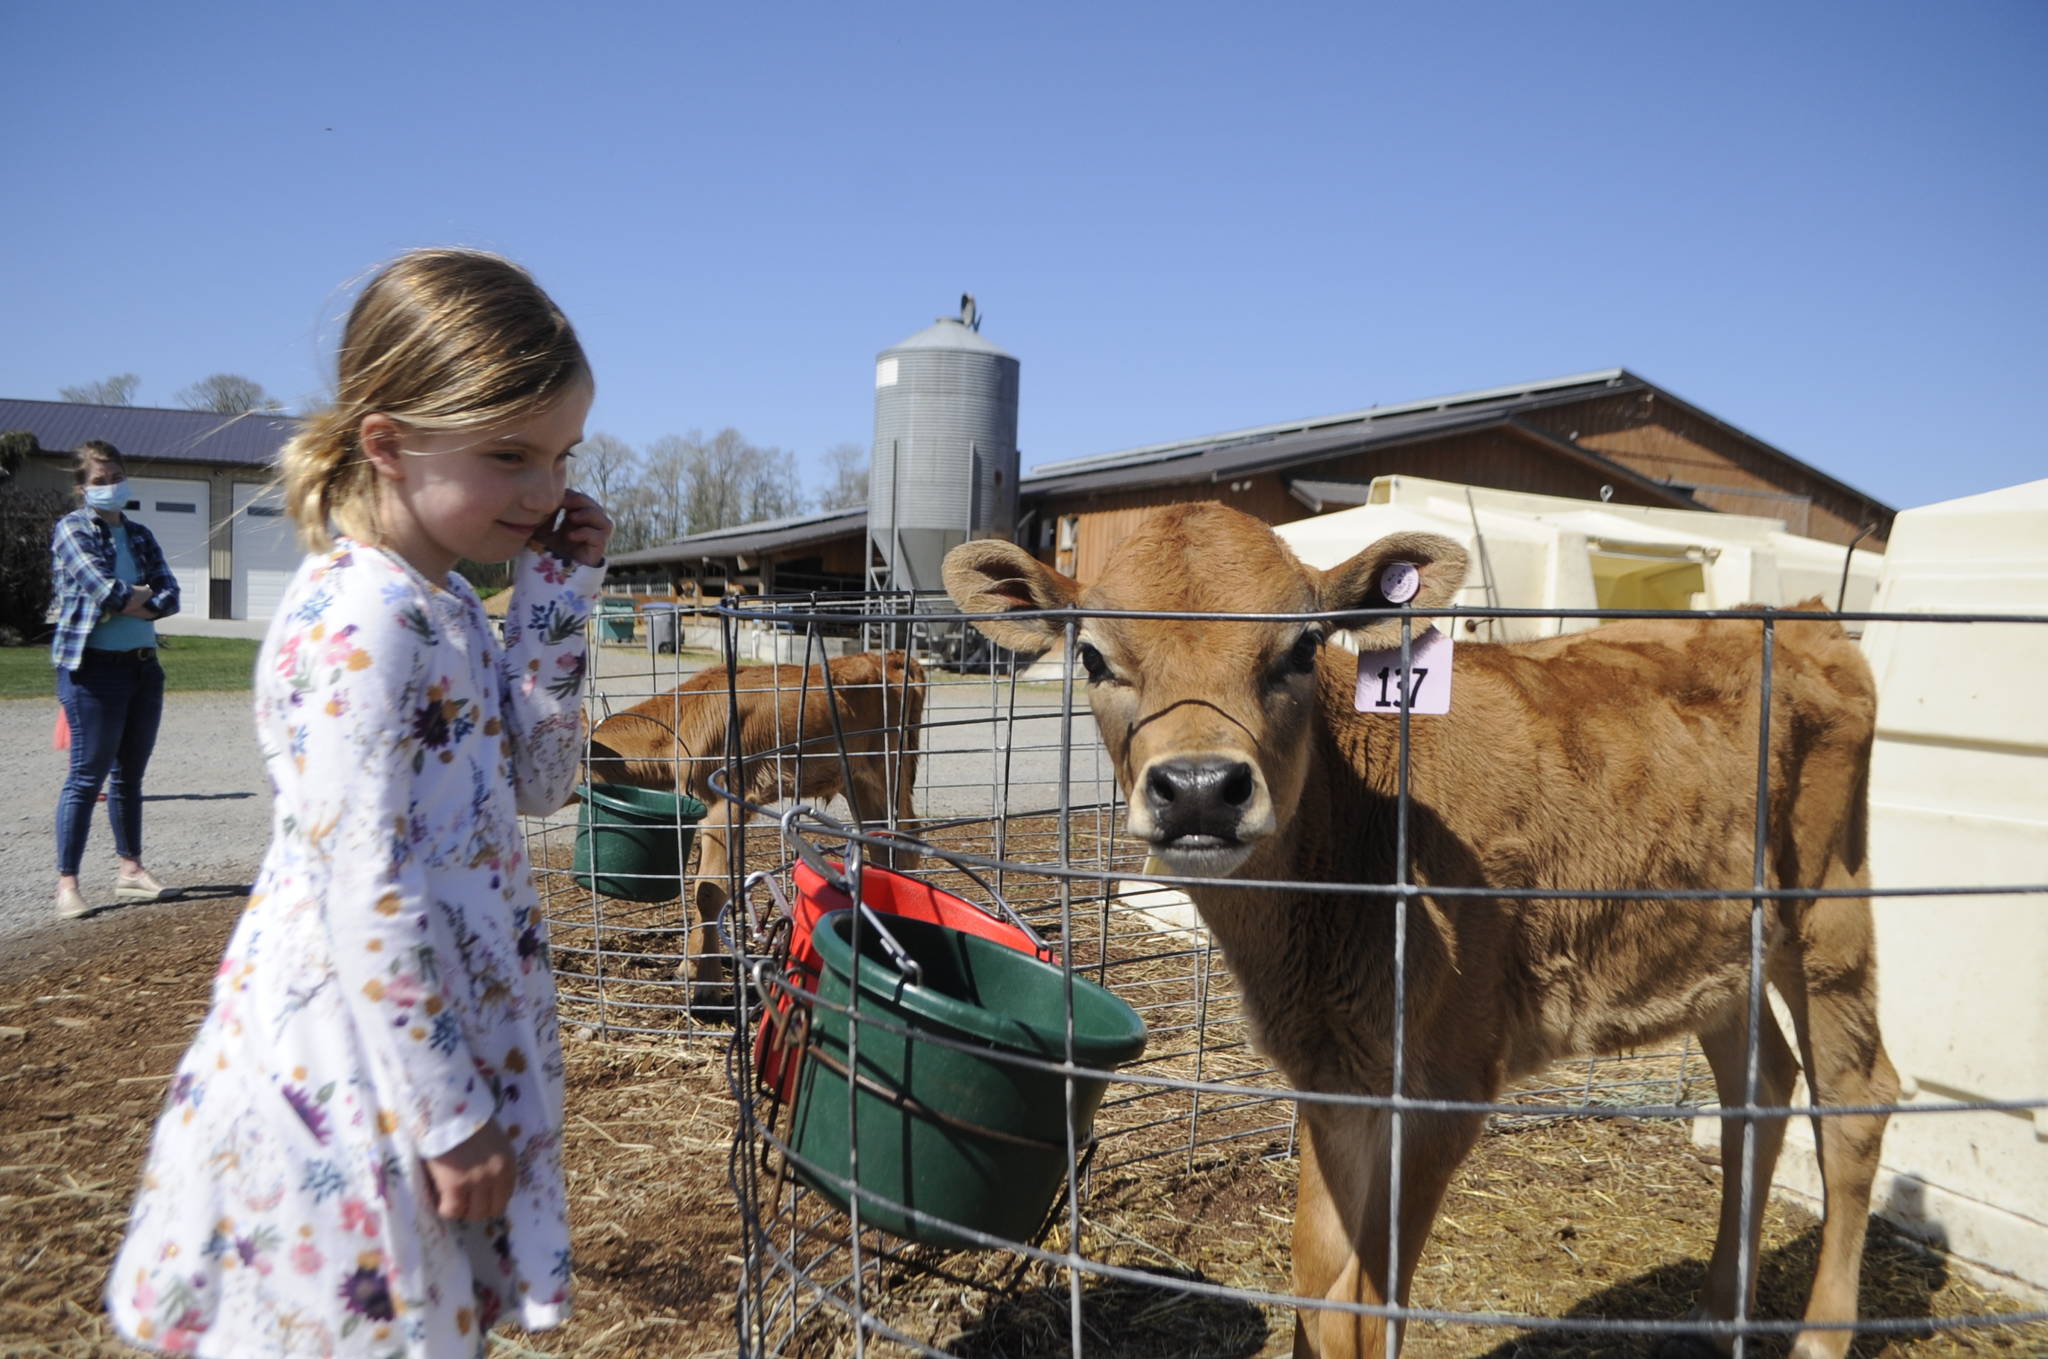 Mae Shantz, 5, of Sequim checks in with one of the many new calves at Dungeness Valley Creamery as Mae’s mom Heidi looks on. This week, the farm begins distributing A2 milk after years of genetically testing to offer the niche milk, which the farm’s owners say is easier on many people’s stomachs. (Matthew Nash/Olympic Peninsula News Group)